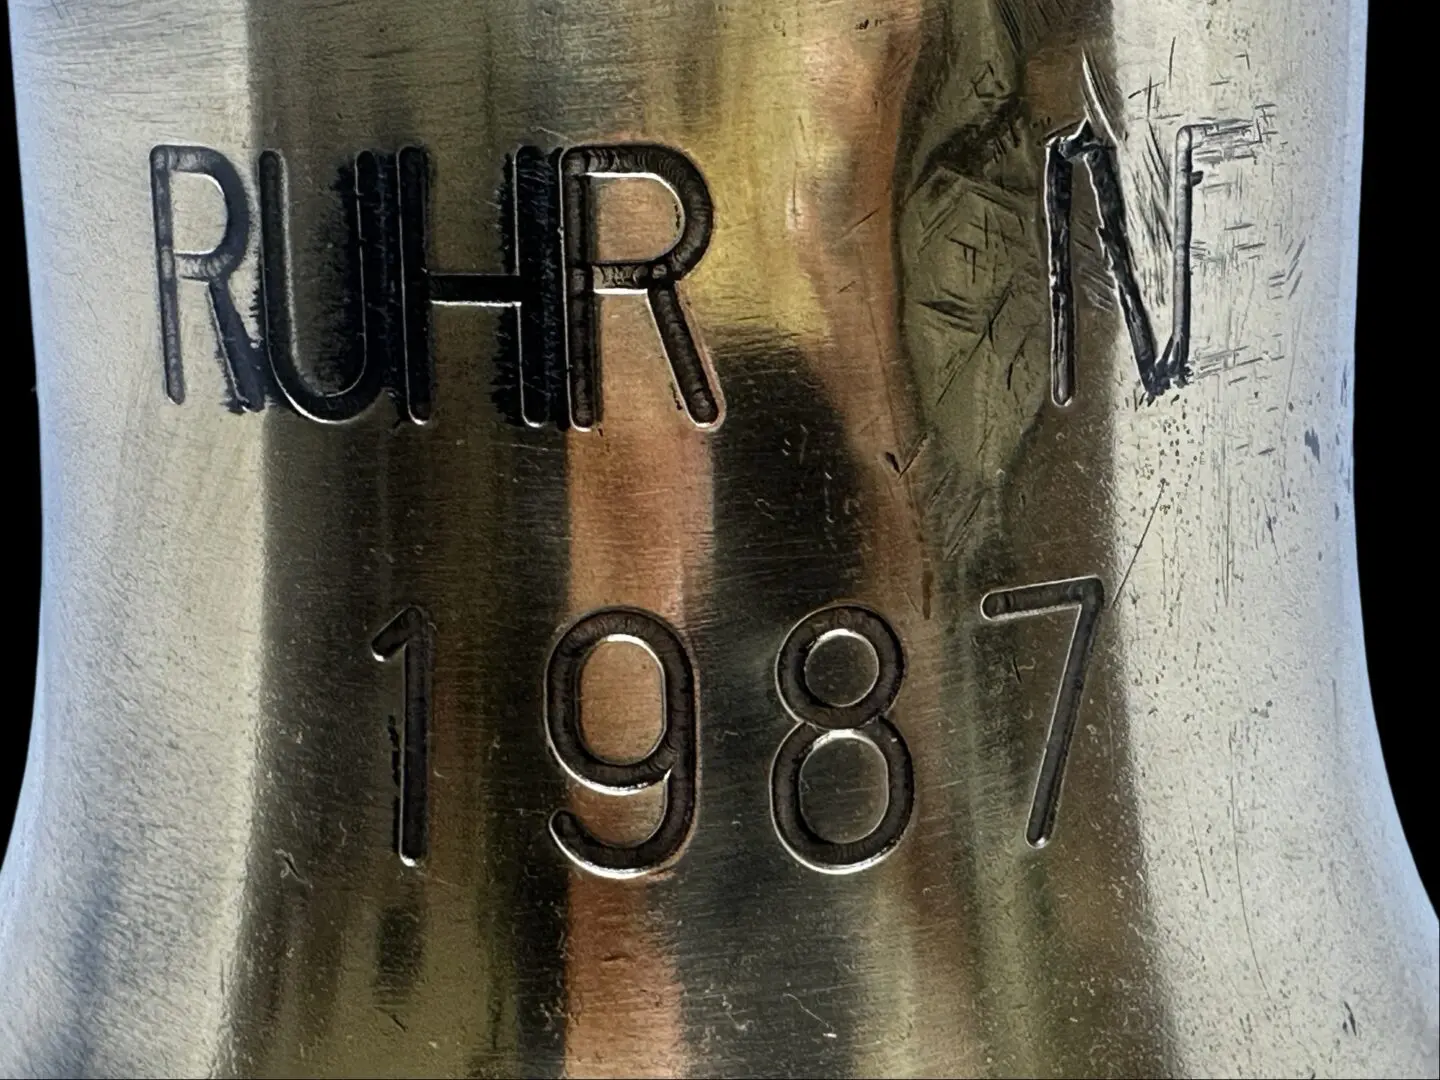 Metal surface with "RUHR N 1987" engraved.